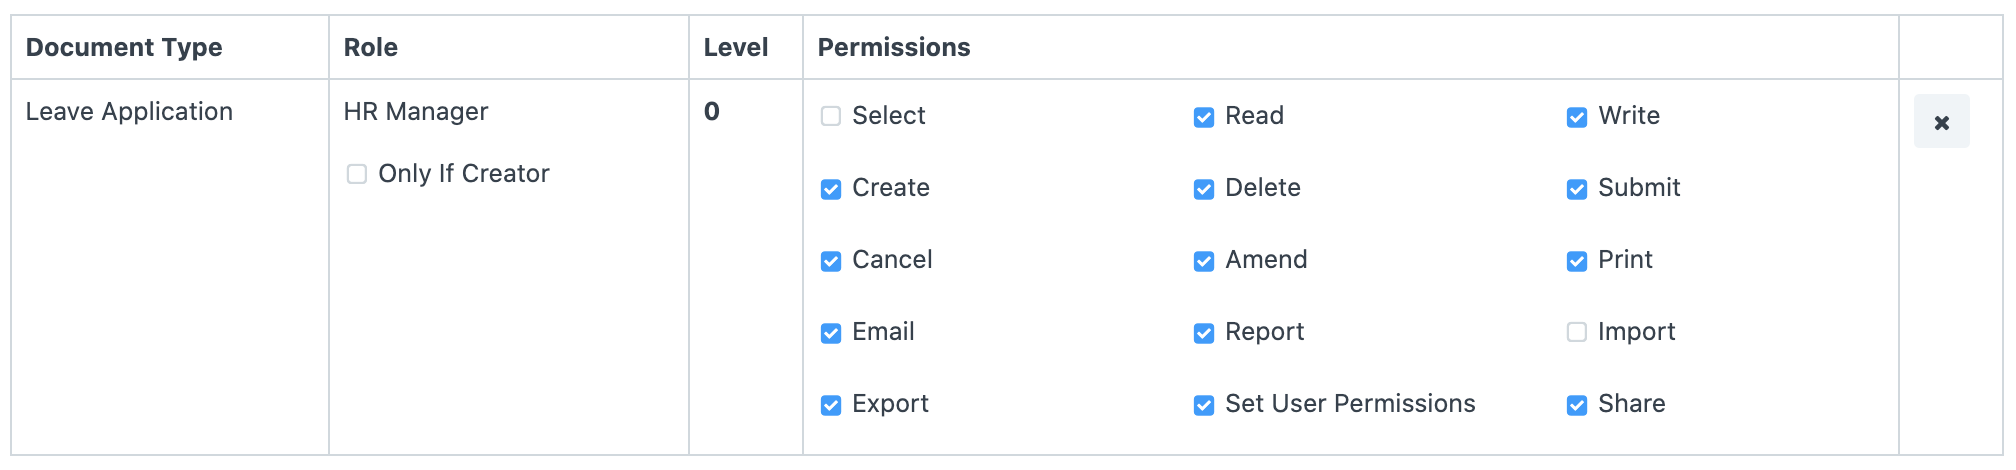 Giving Submit and Cancel permissions to HR Manager for Leave Applications. 'Apply User Permissions' is unchecked to give full access.